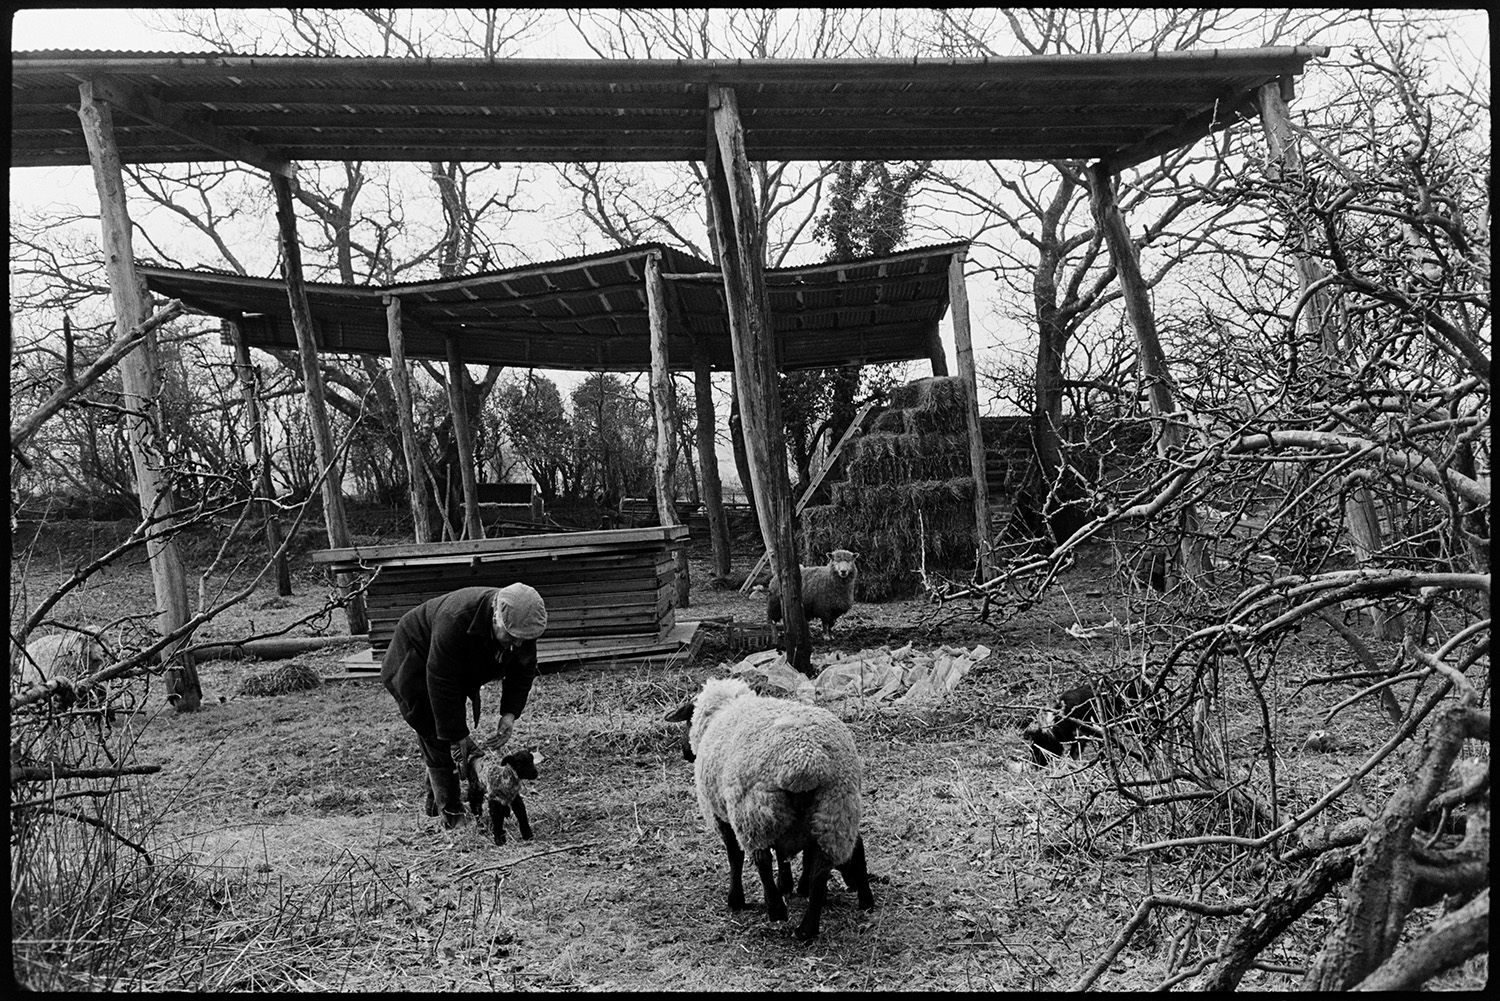 Farmers with ewes and lambs. Empty barns behind. 
[A man with ewes and lambs by two barns in  a field at The Barton, Burrington. Hay bales are stacked in one of the barns.]